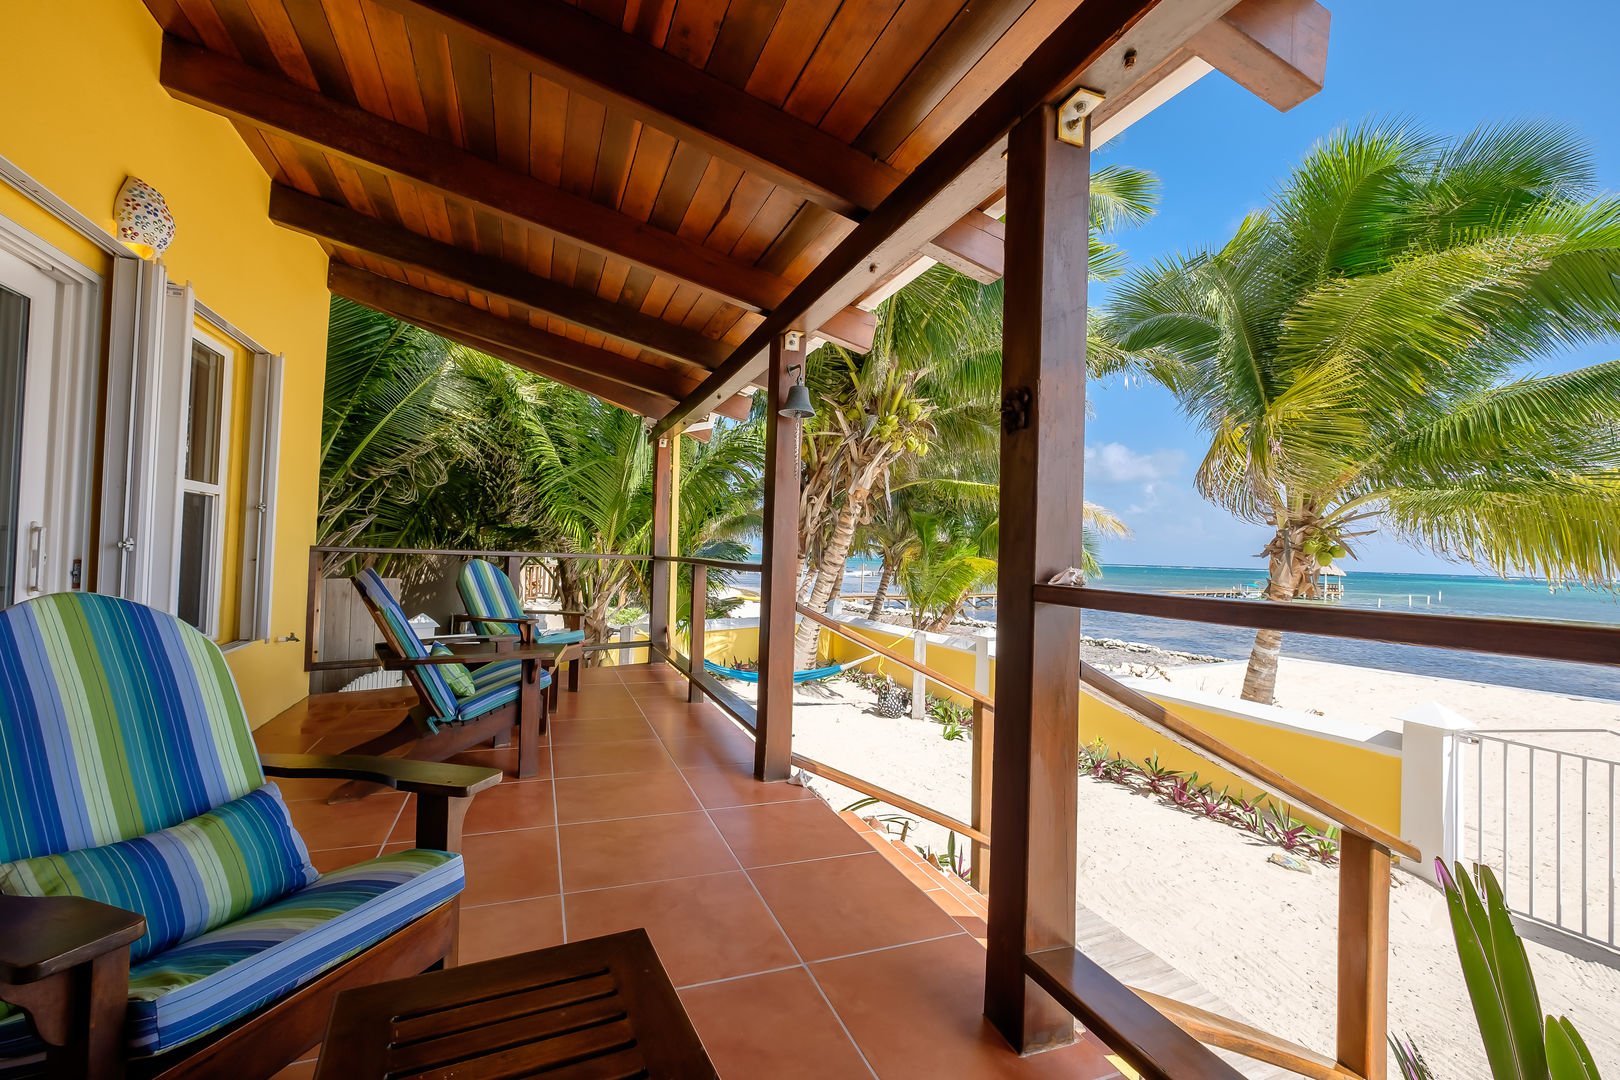 Casa De Bonita gorgeous private home sits on the beach with view of the Caribbean sea.